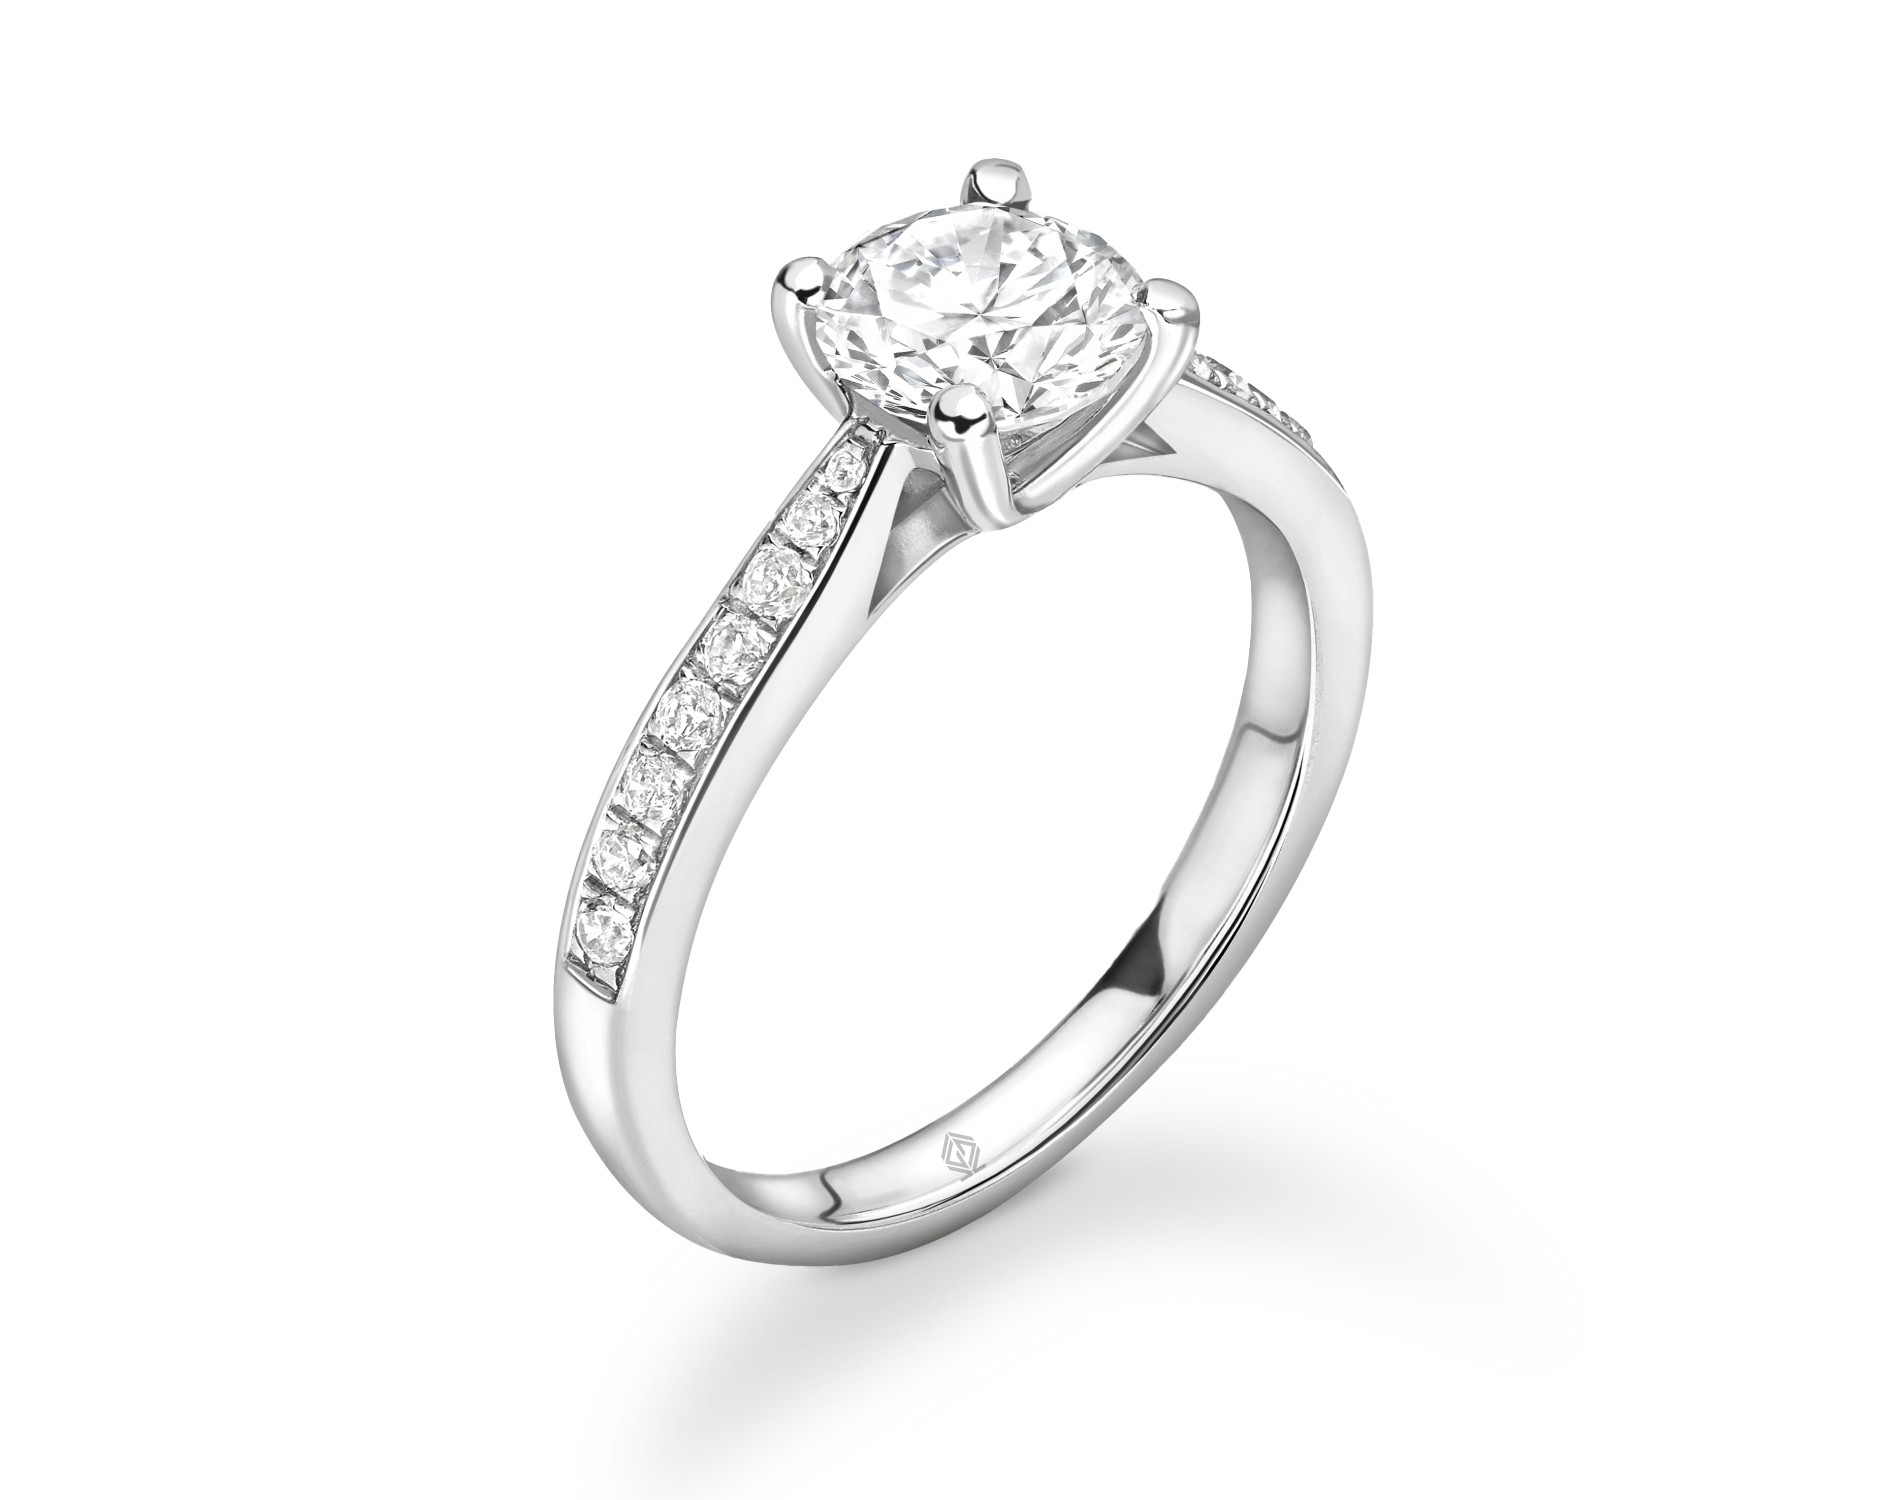 18K WHITE GOLD ROUND CUT DIAMOND ENGAGEMENT RING WITH SIDE STONES CHANNEL SET